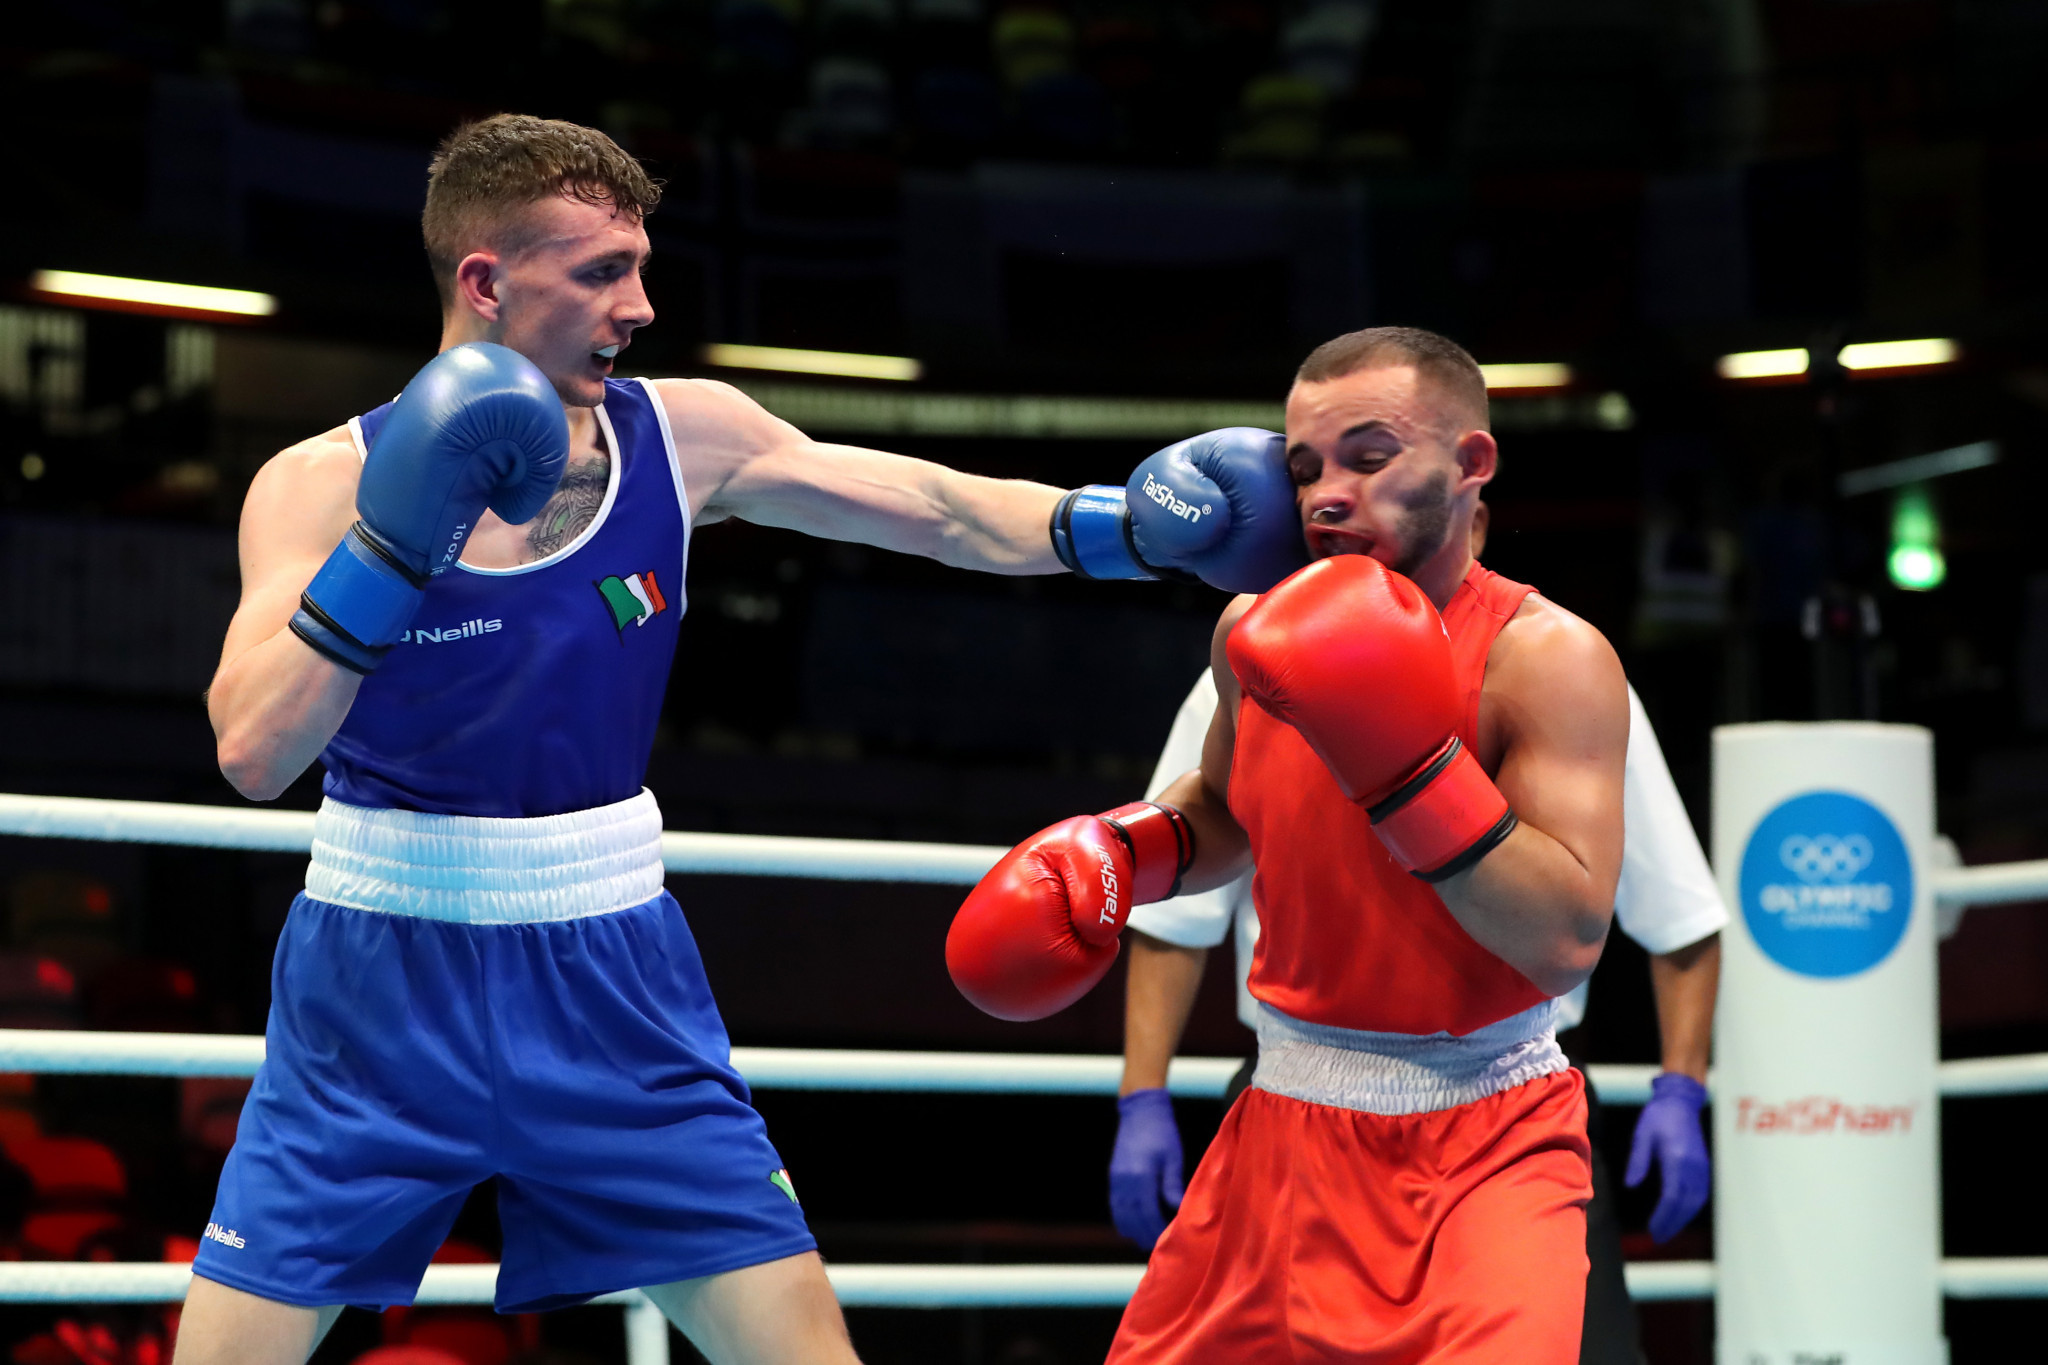 Ireland's Olympic boxing hopefuls suffer "body blow" as IABA event is postponed